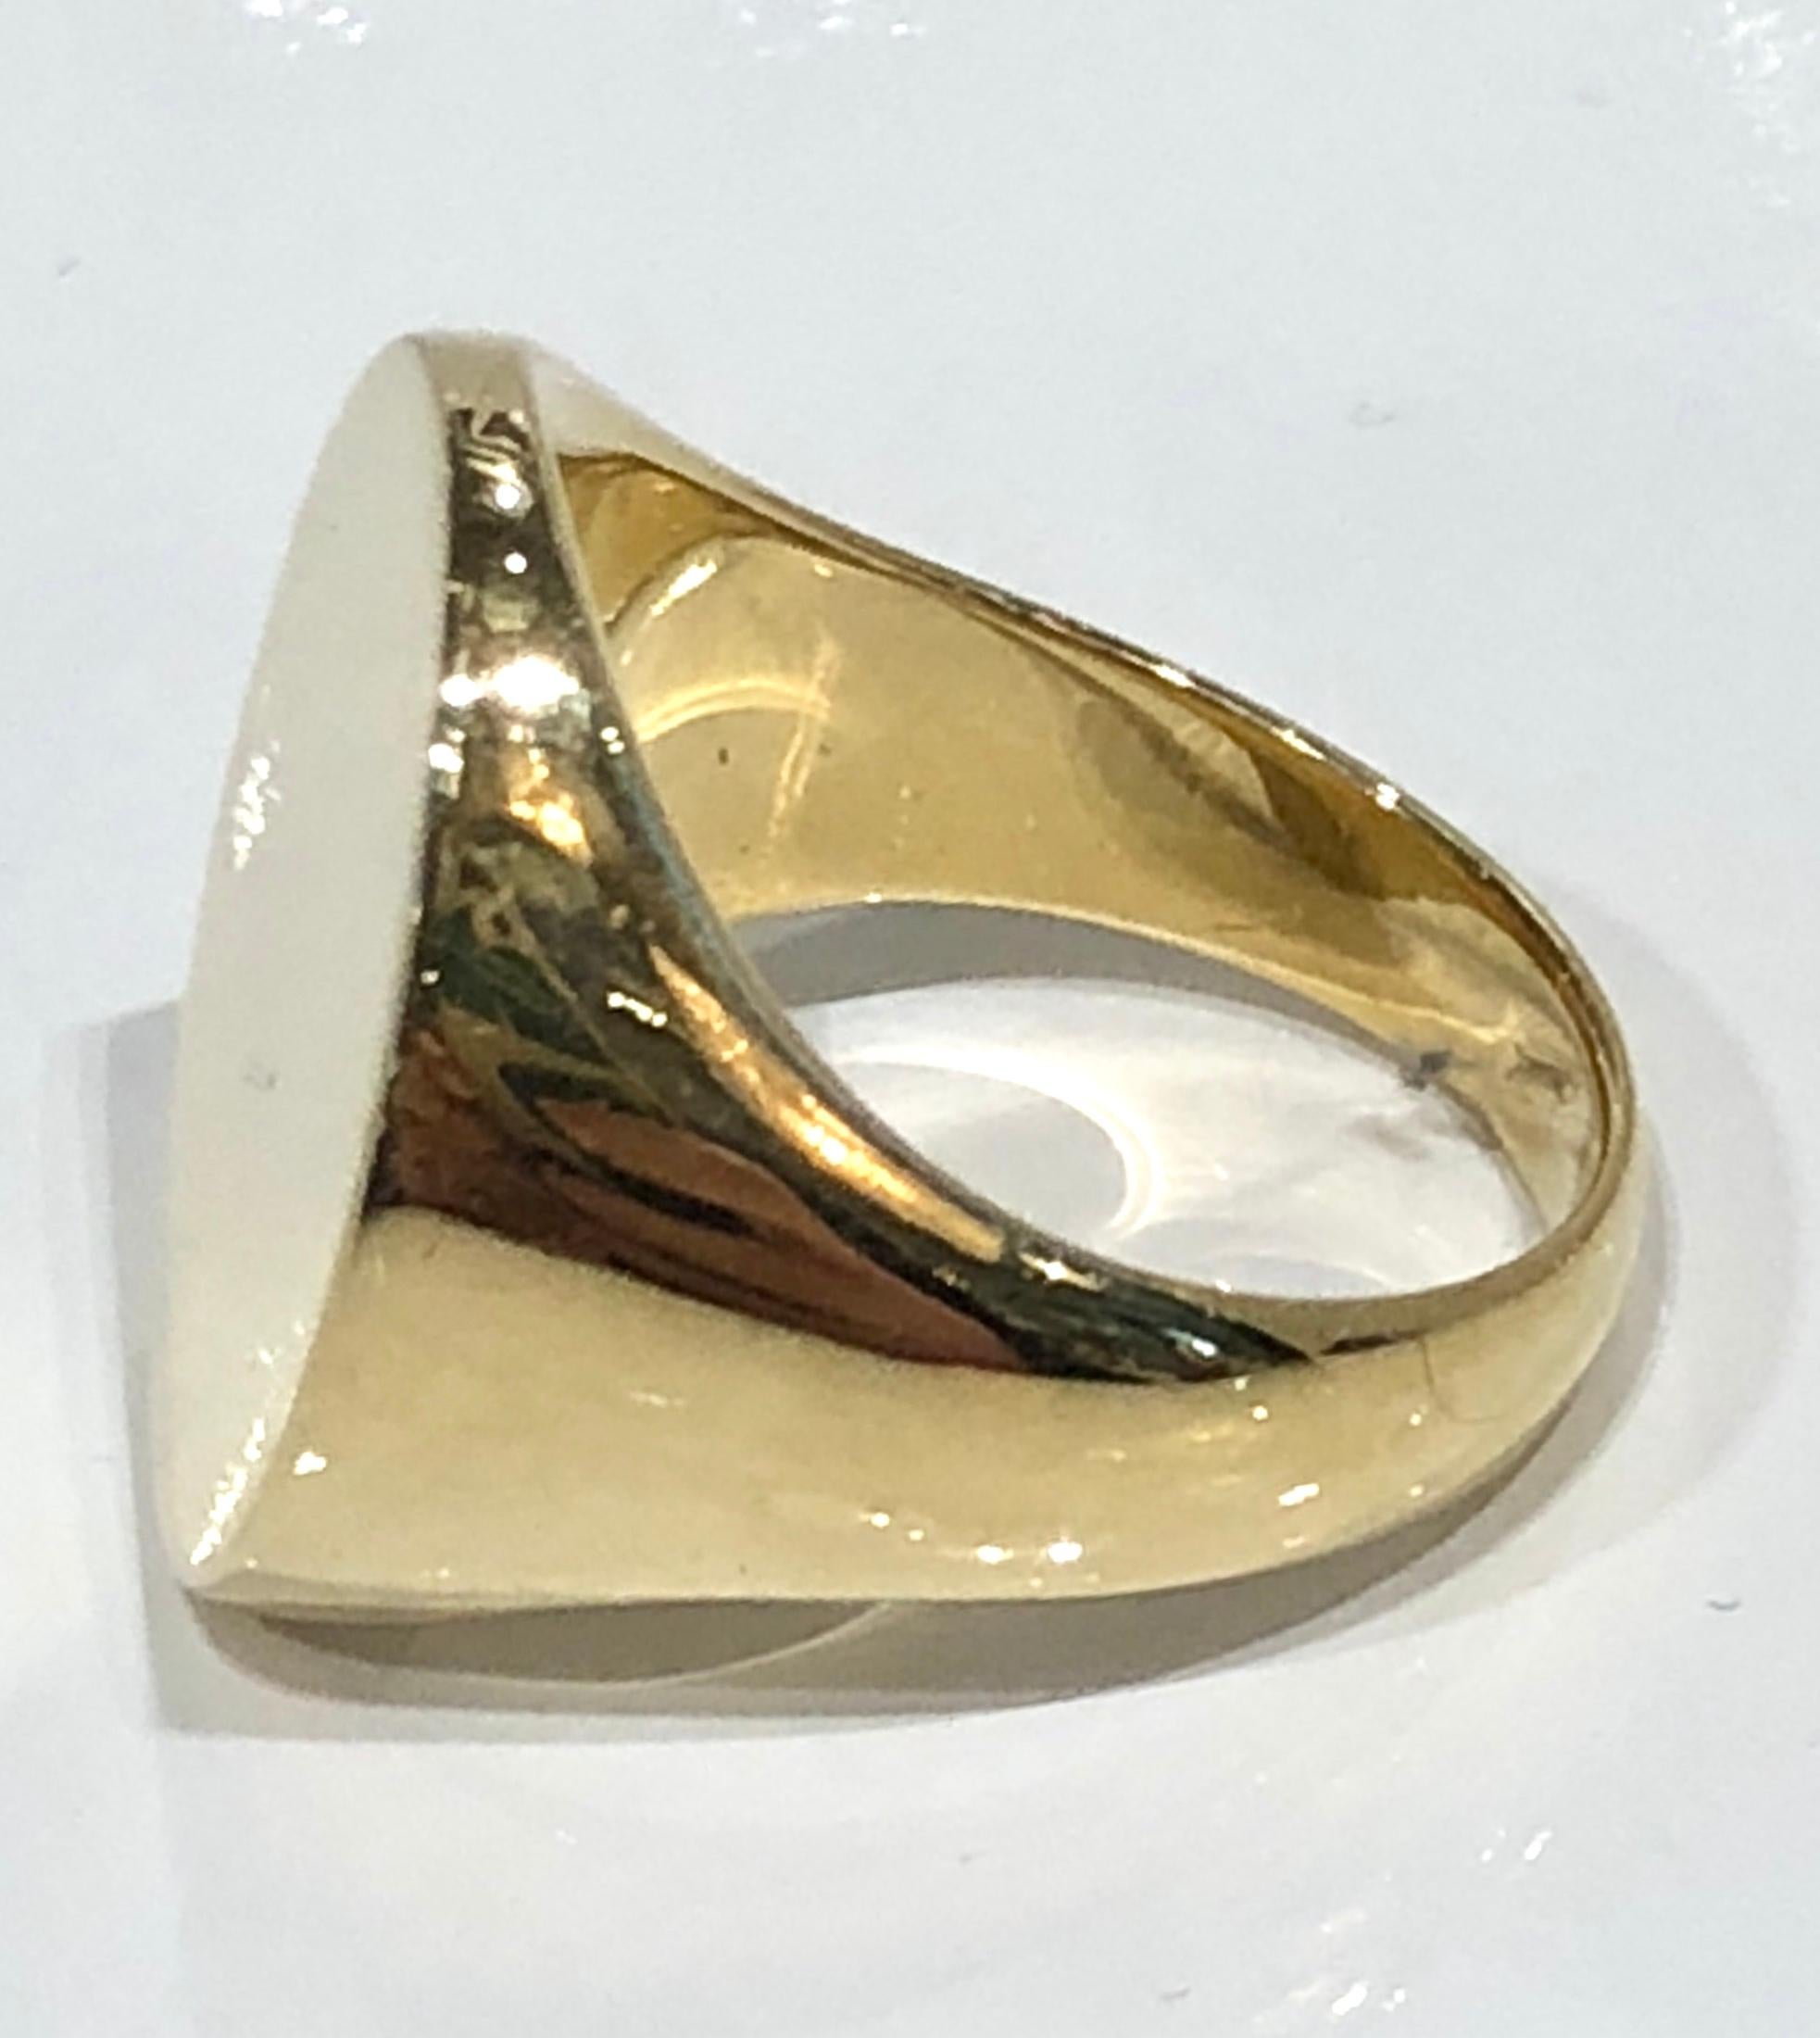 Unisex oval 18k yellow gold Signet Ring. Perfect for engraving.
Designed by Martyn Lawrence Bullard
Can be made in any size in white, yellow or rose gold, lead time 4 weeks